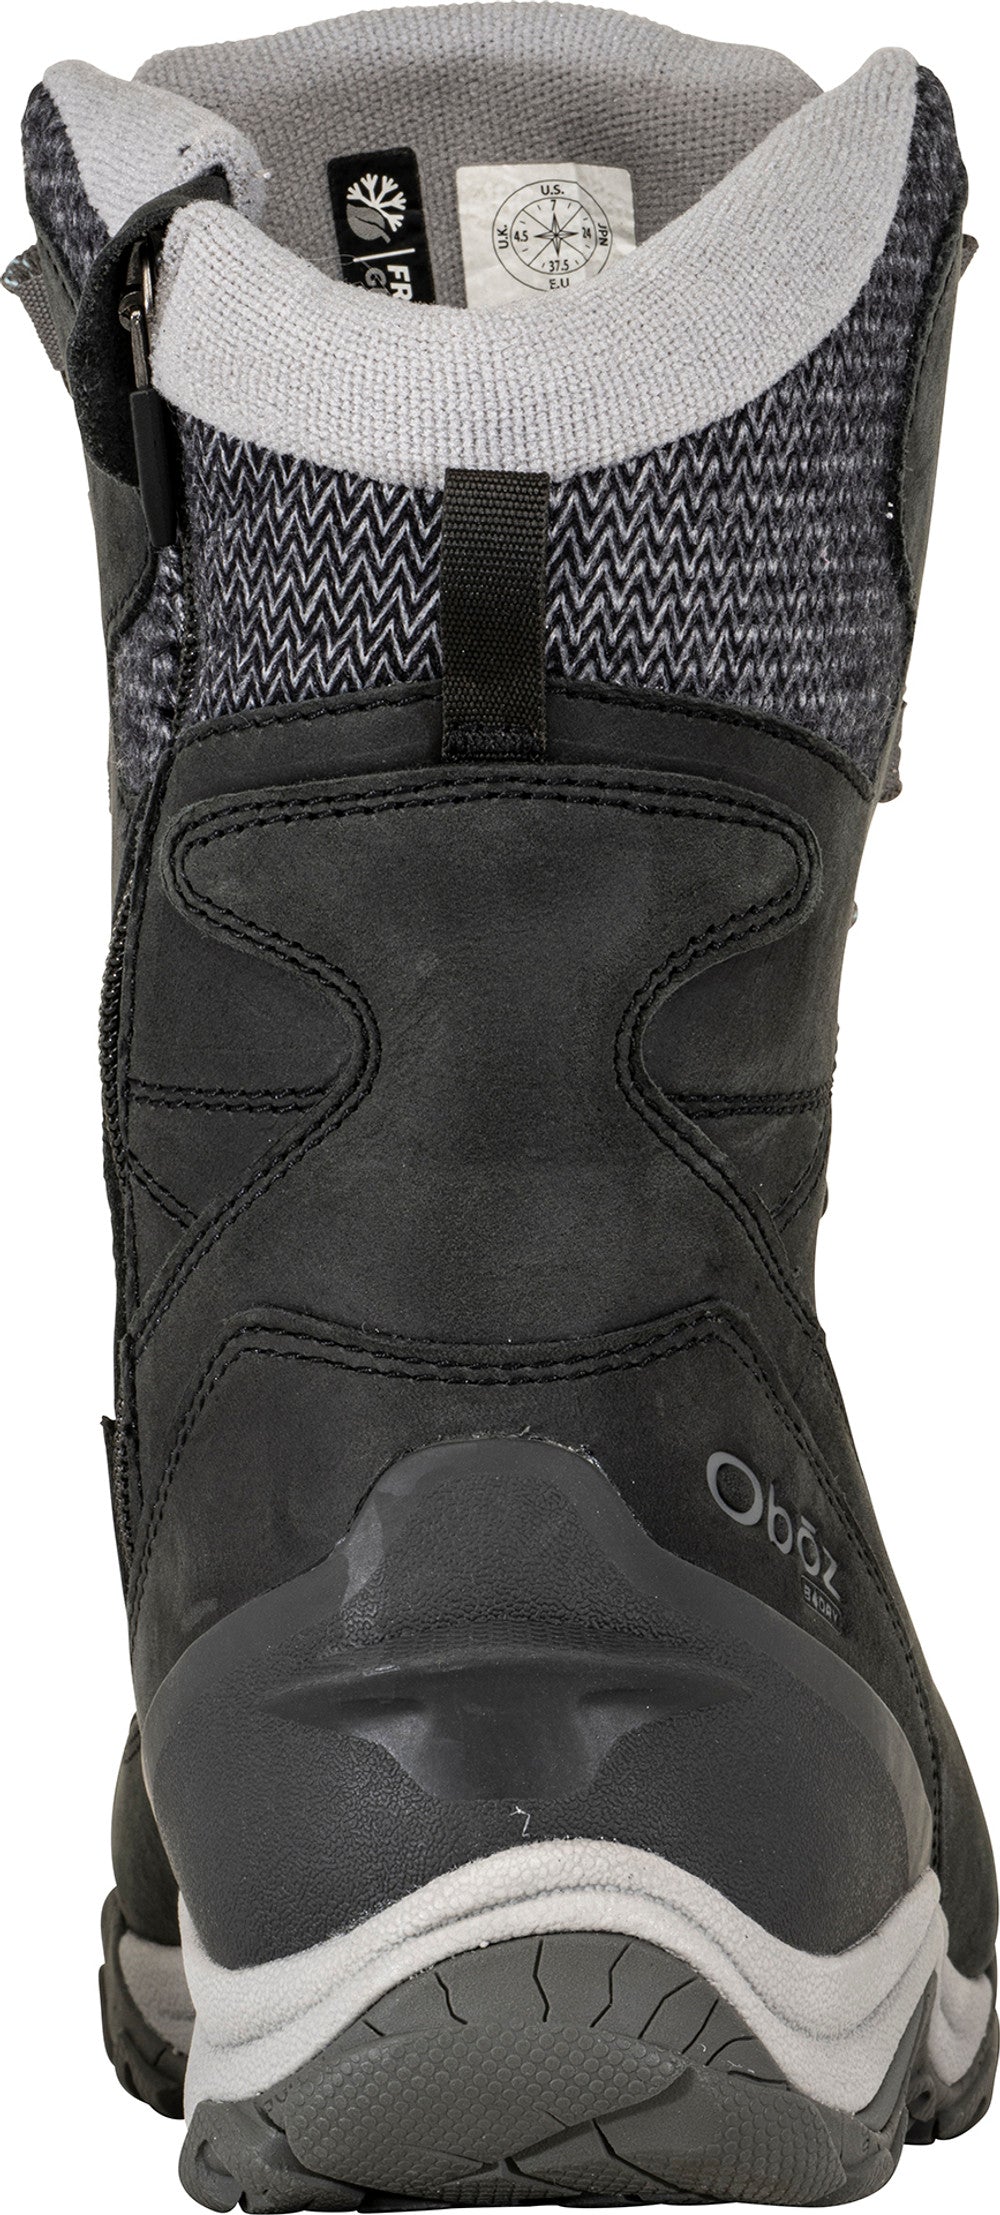 Women's Oboz Ousel Mid Insulated Waterproof Color: Black Sea 